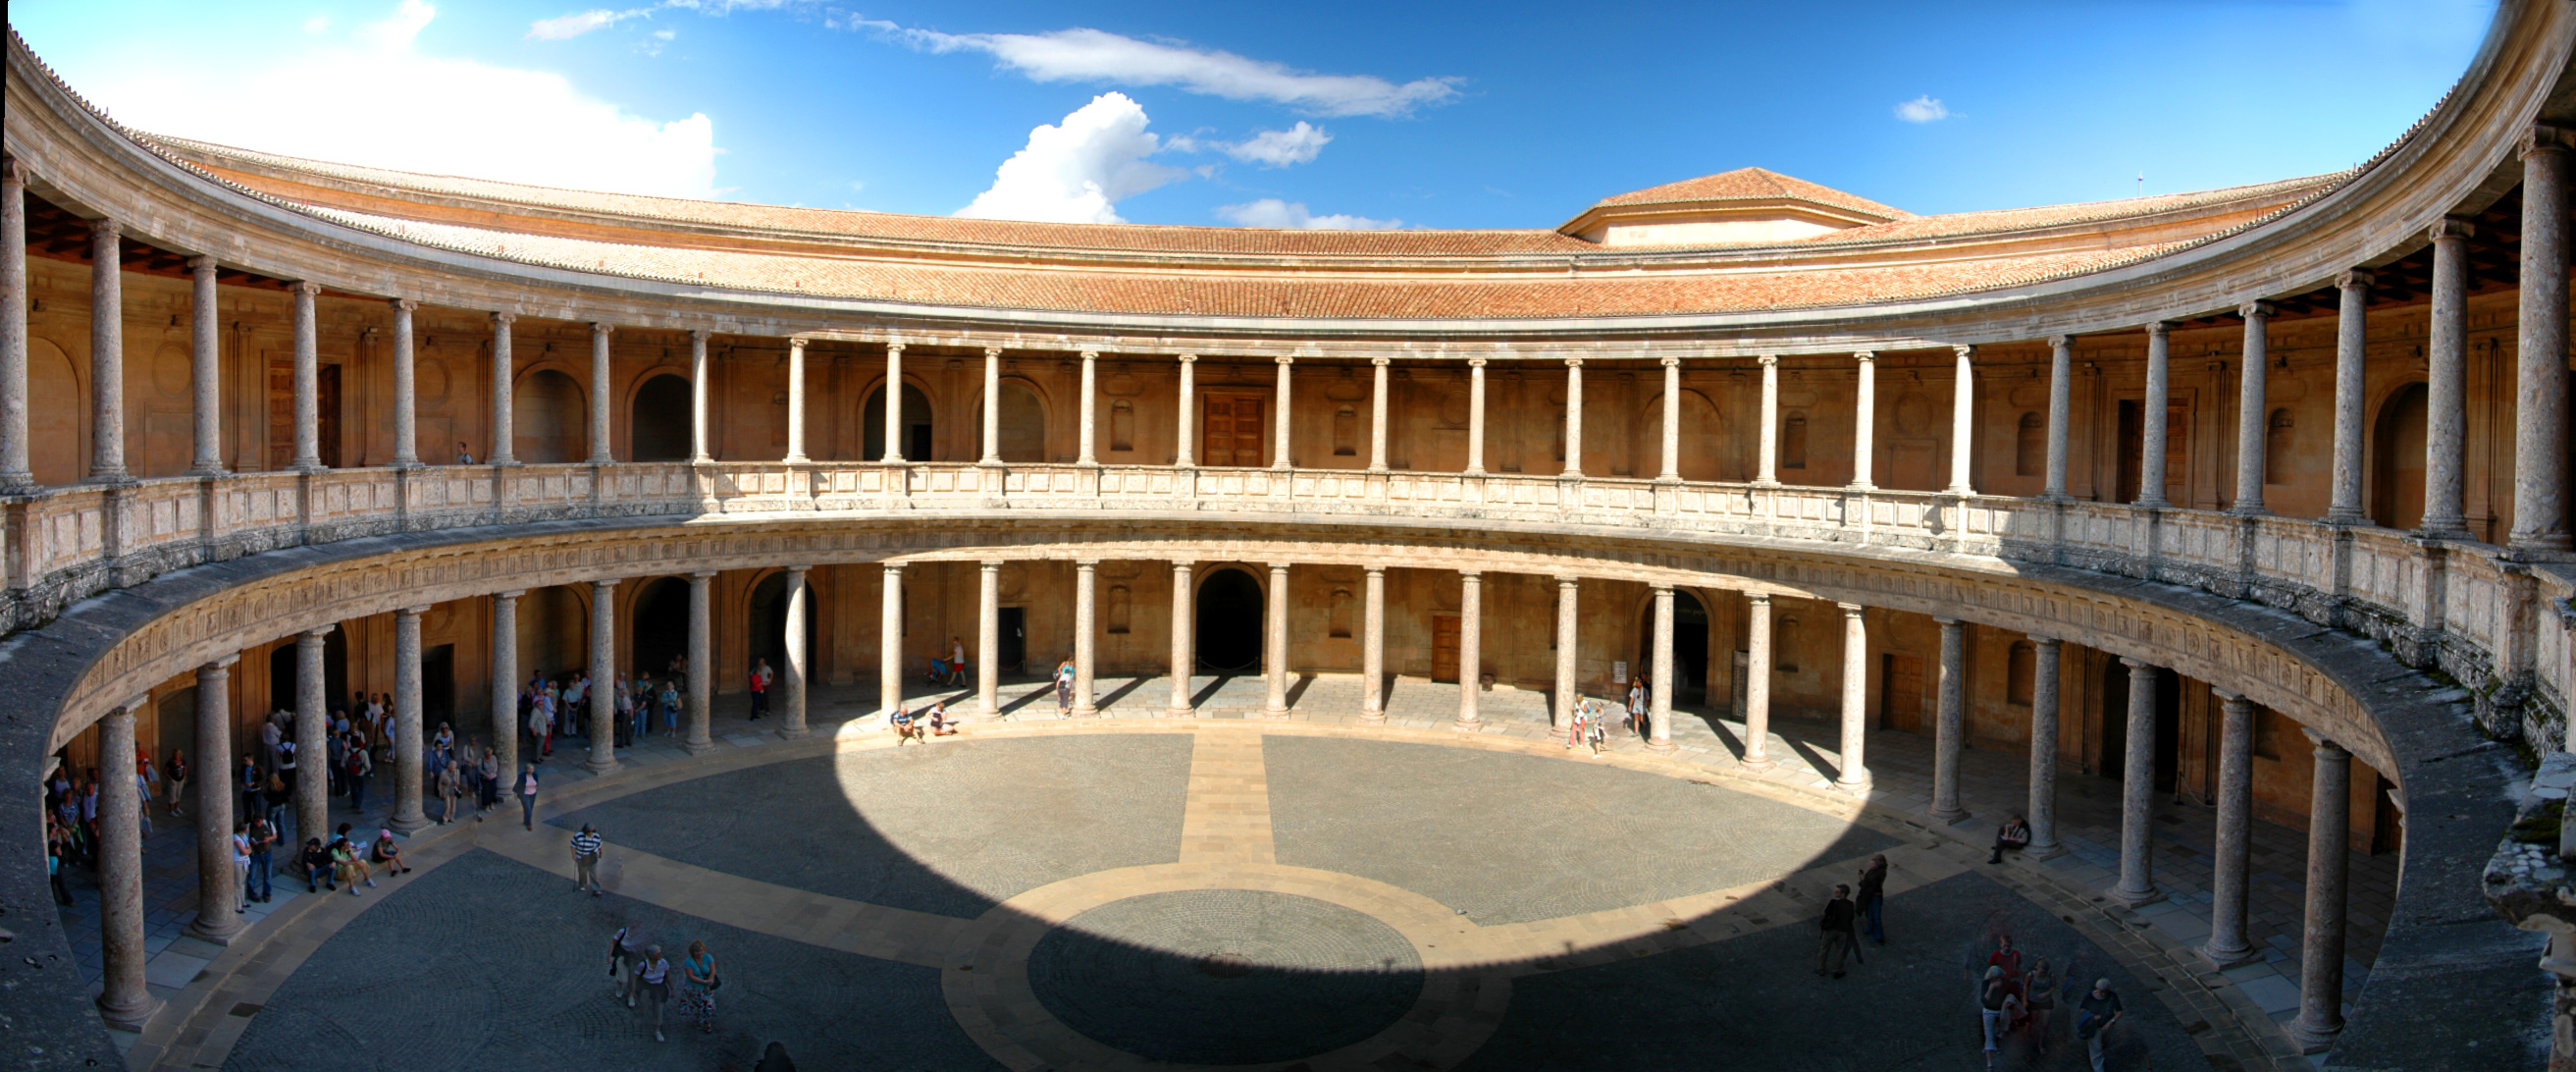 Visit and discover The palace of Carlos V in the Alhambra of Granada